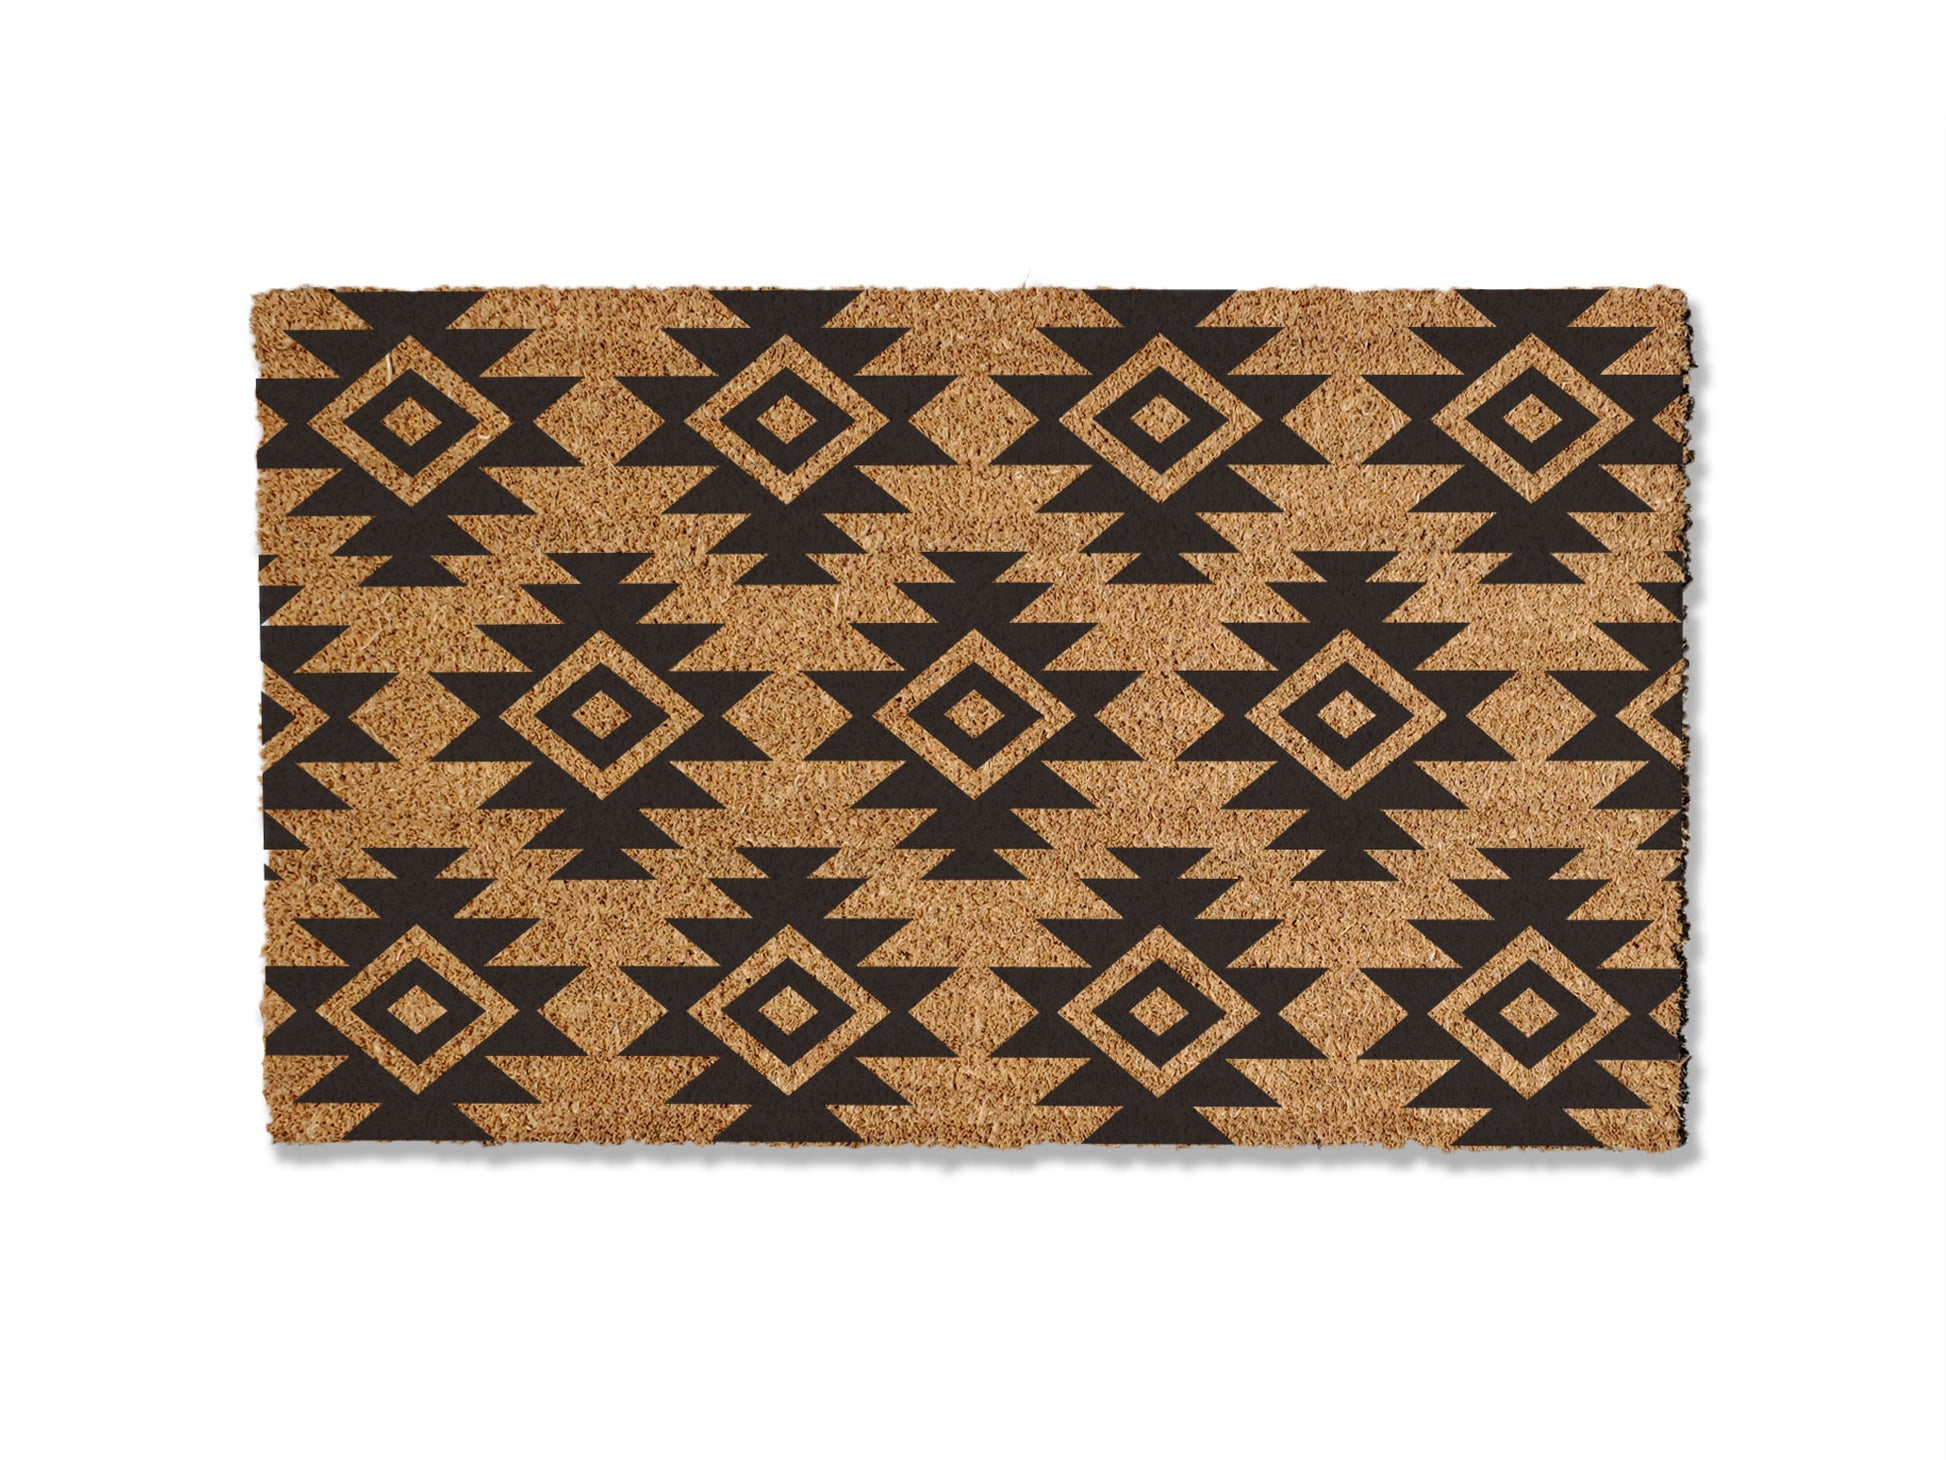 A coir doormat that is 18 inches by 30 inches and has a geometric aztec print painted on it.